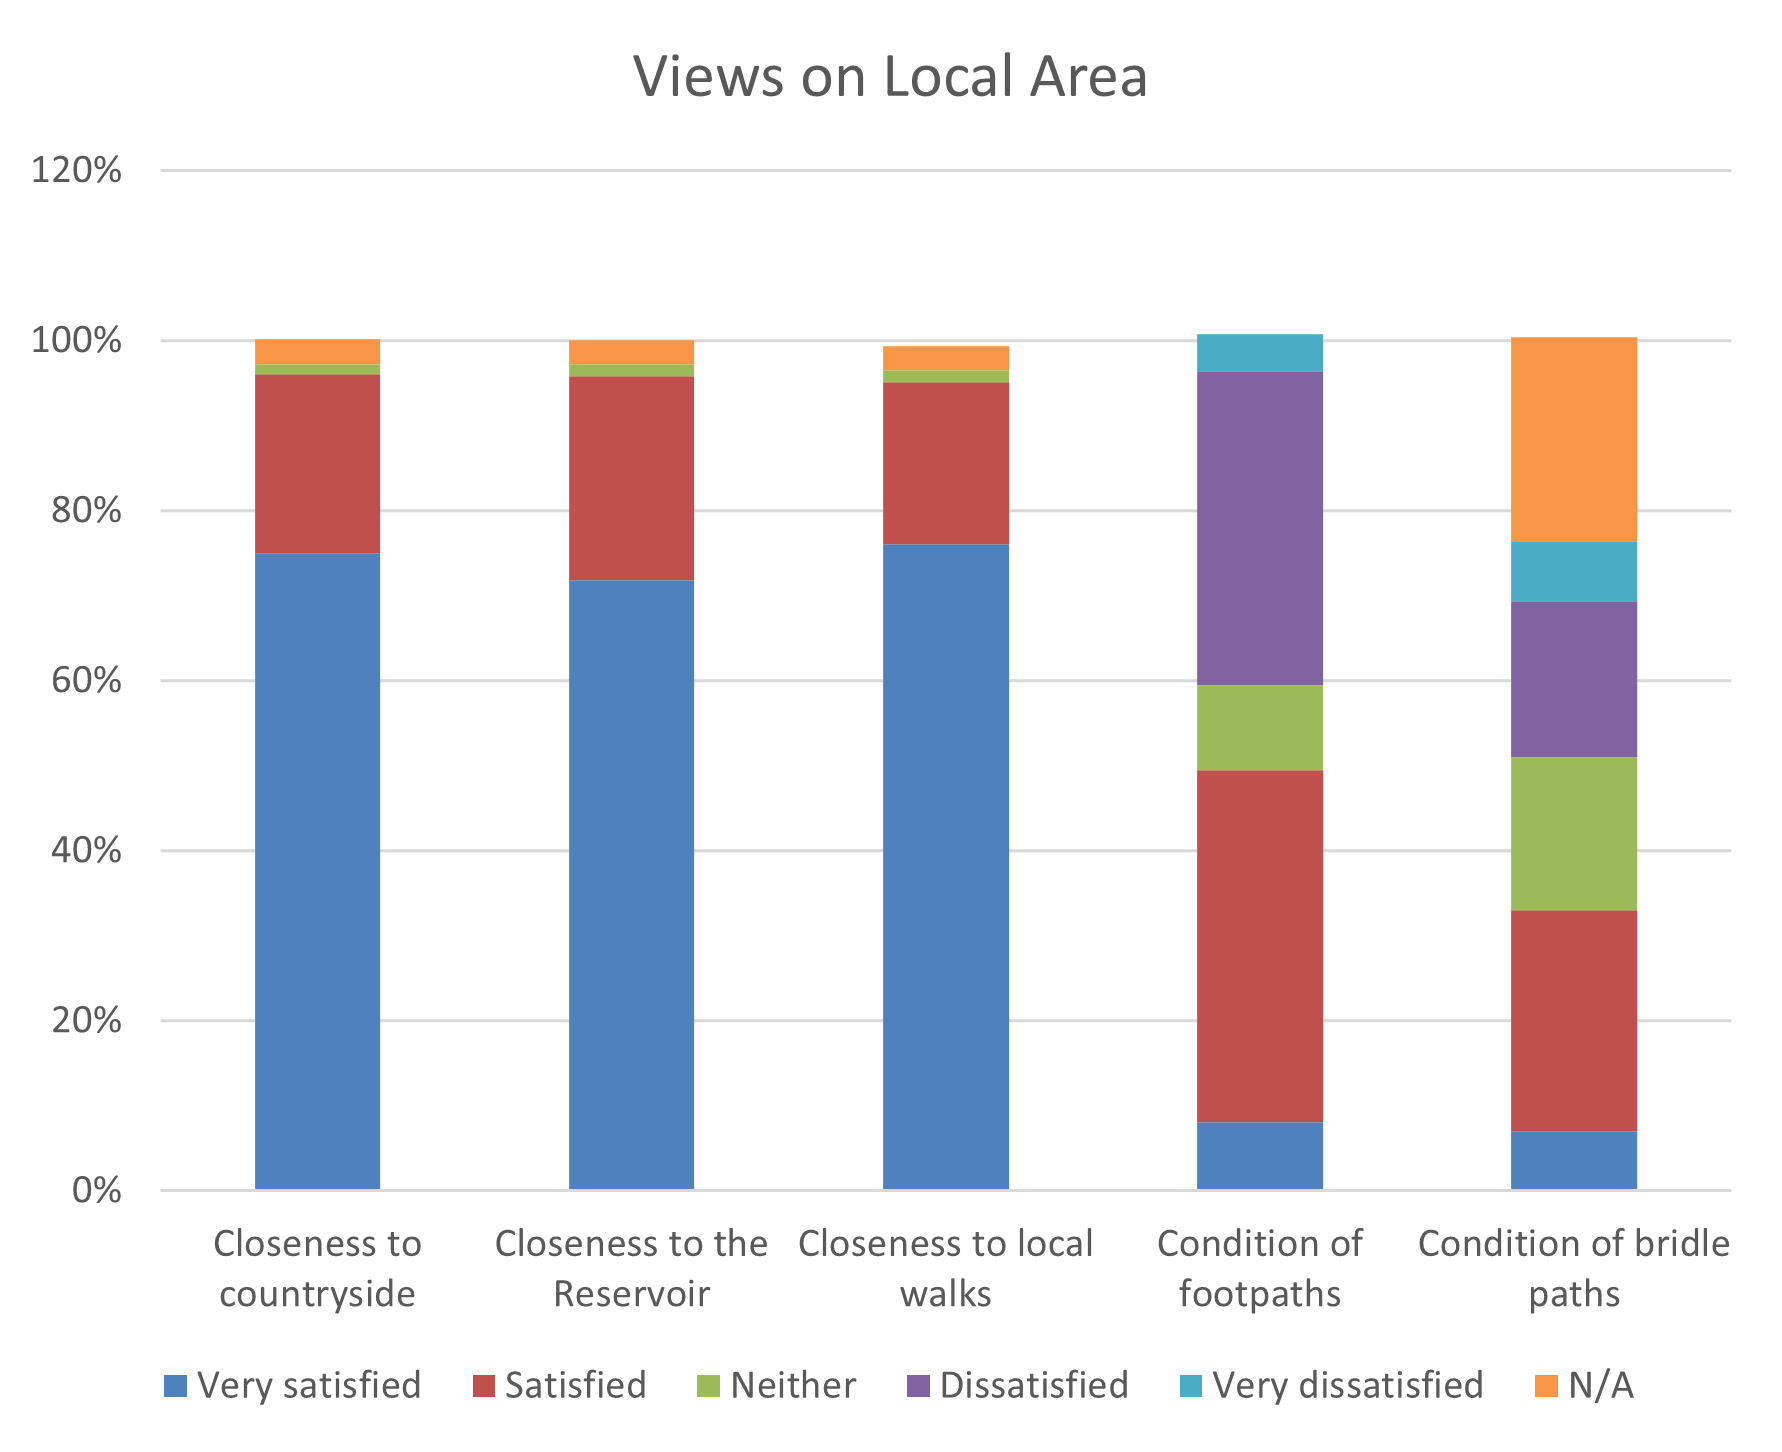 Bar chart of local area views